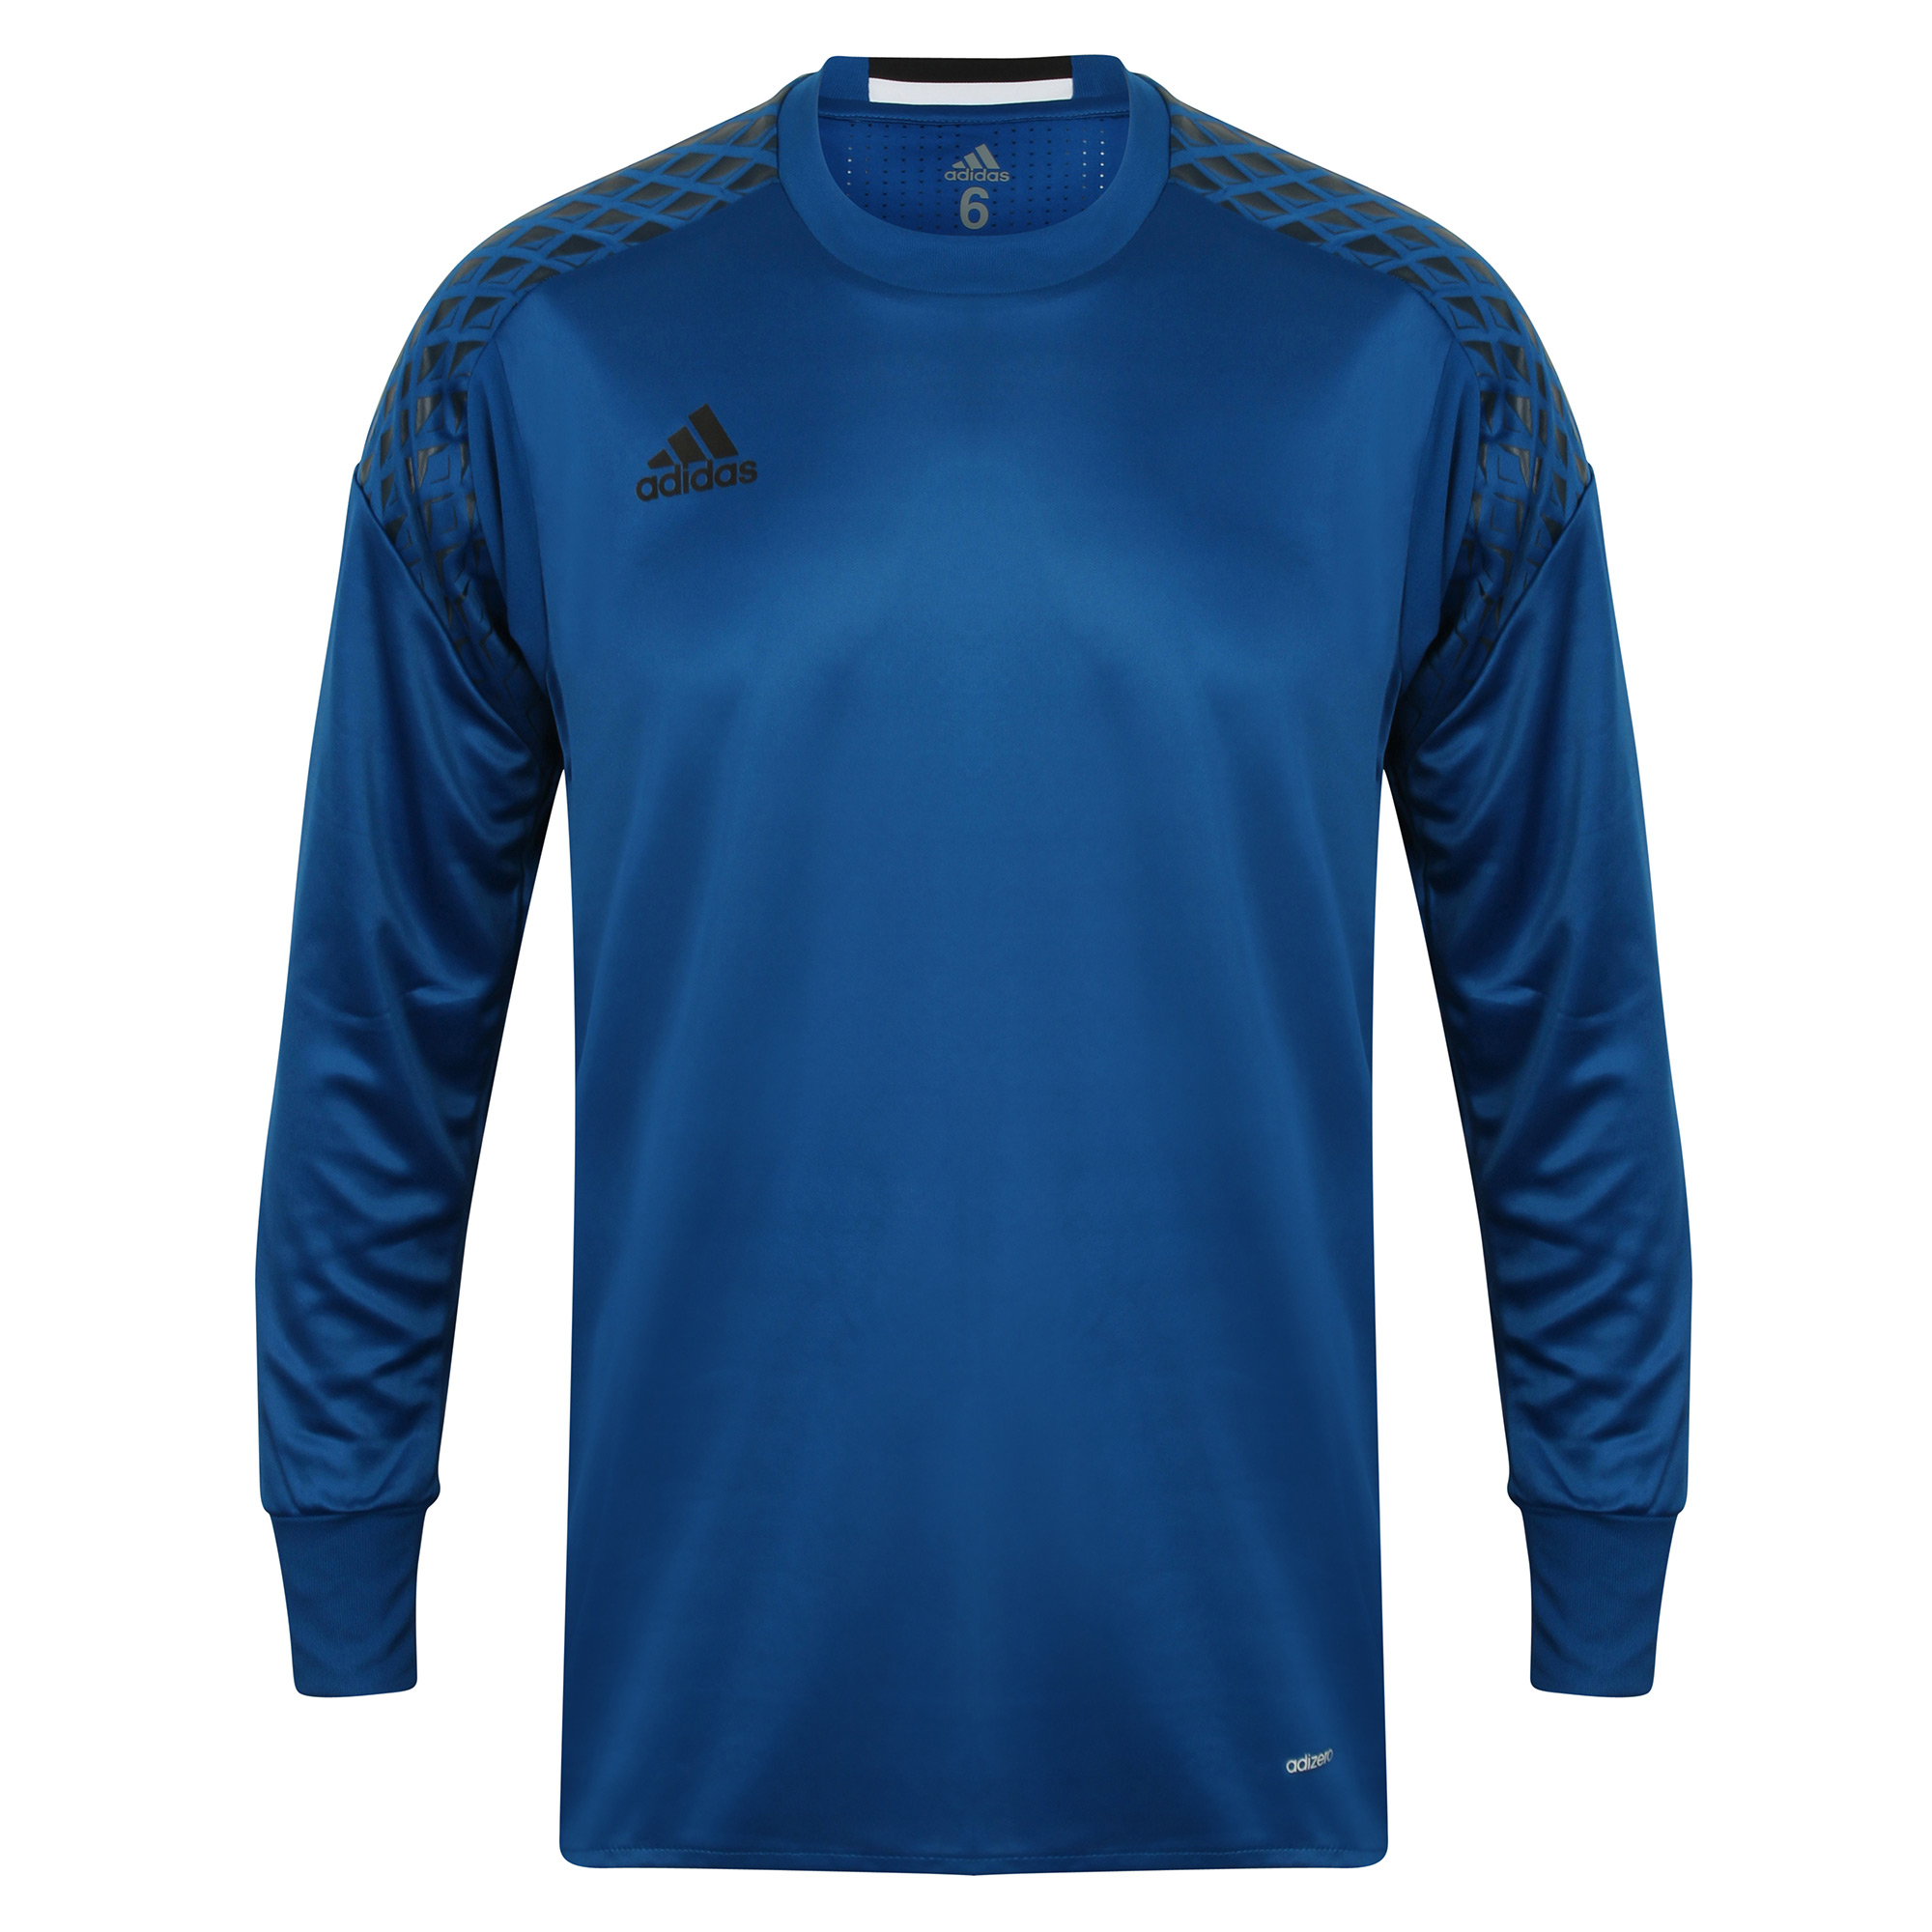 adidas Onore Keepersshirt Blauw 58